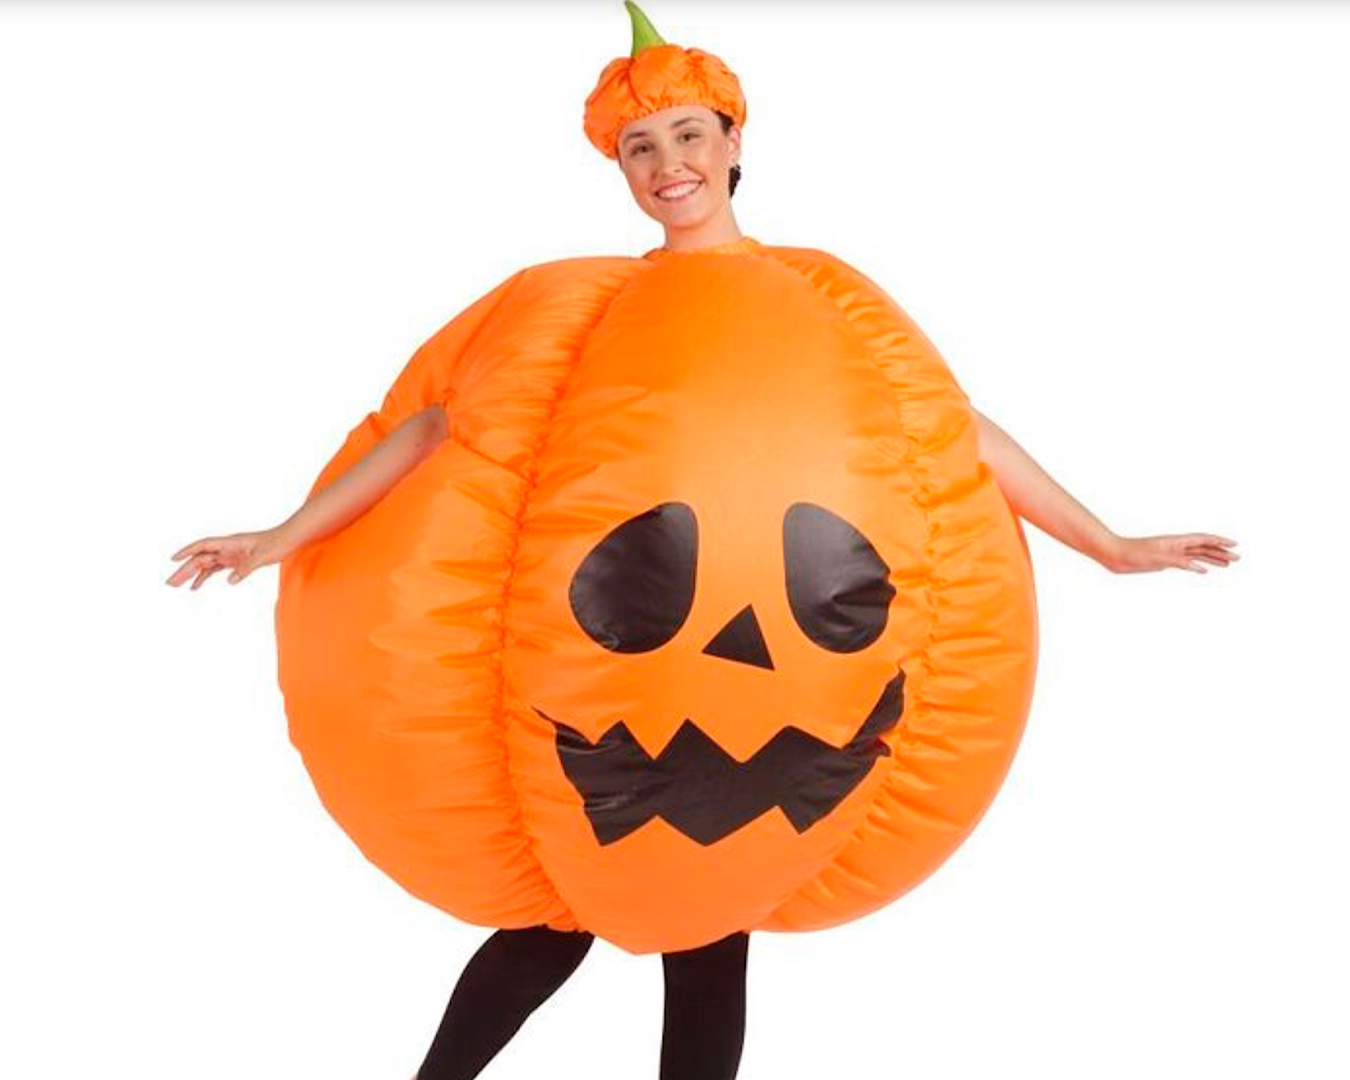 A person wears an inflatable pumpkin Halloween costume and does a happy dance. 